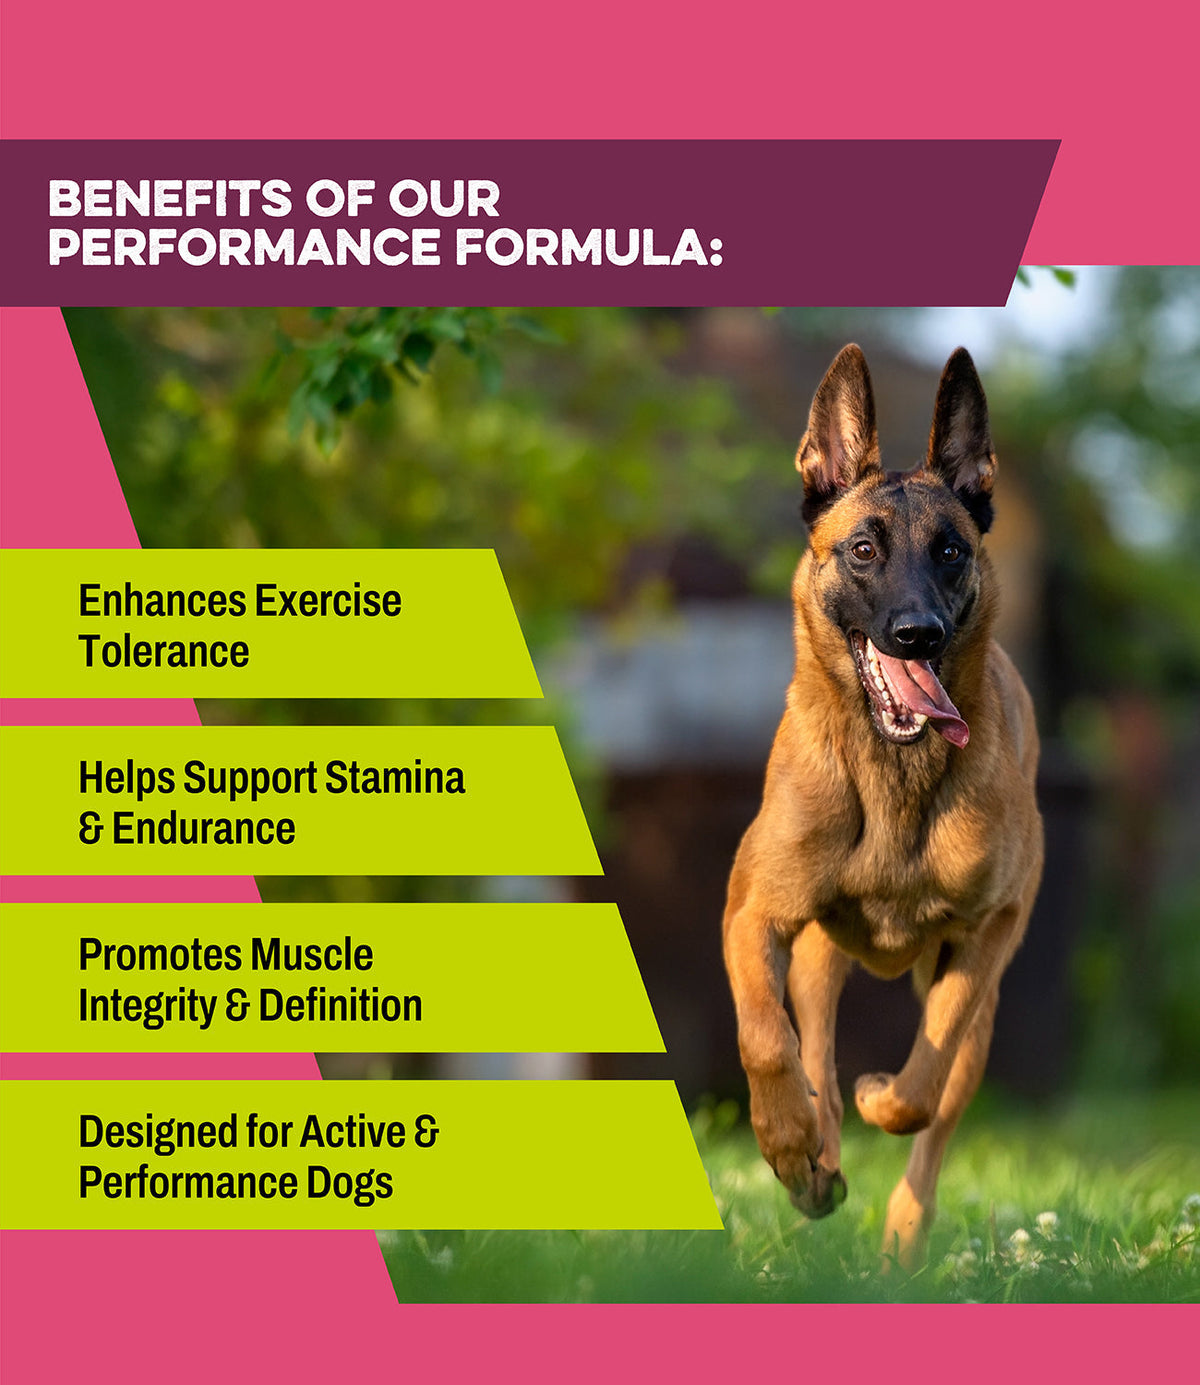 Premium Performance Supplement for Active Dogs